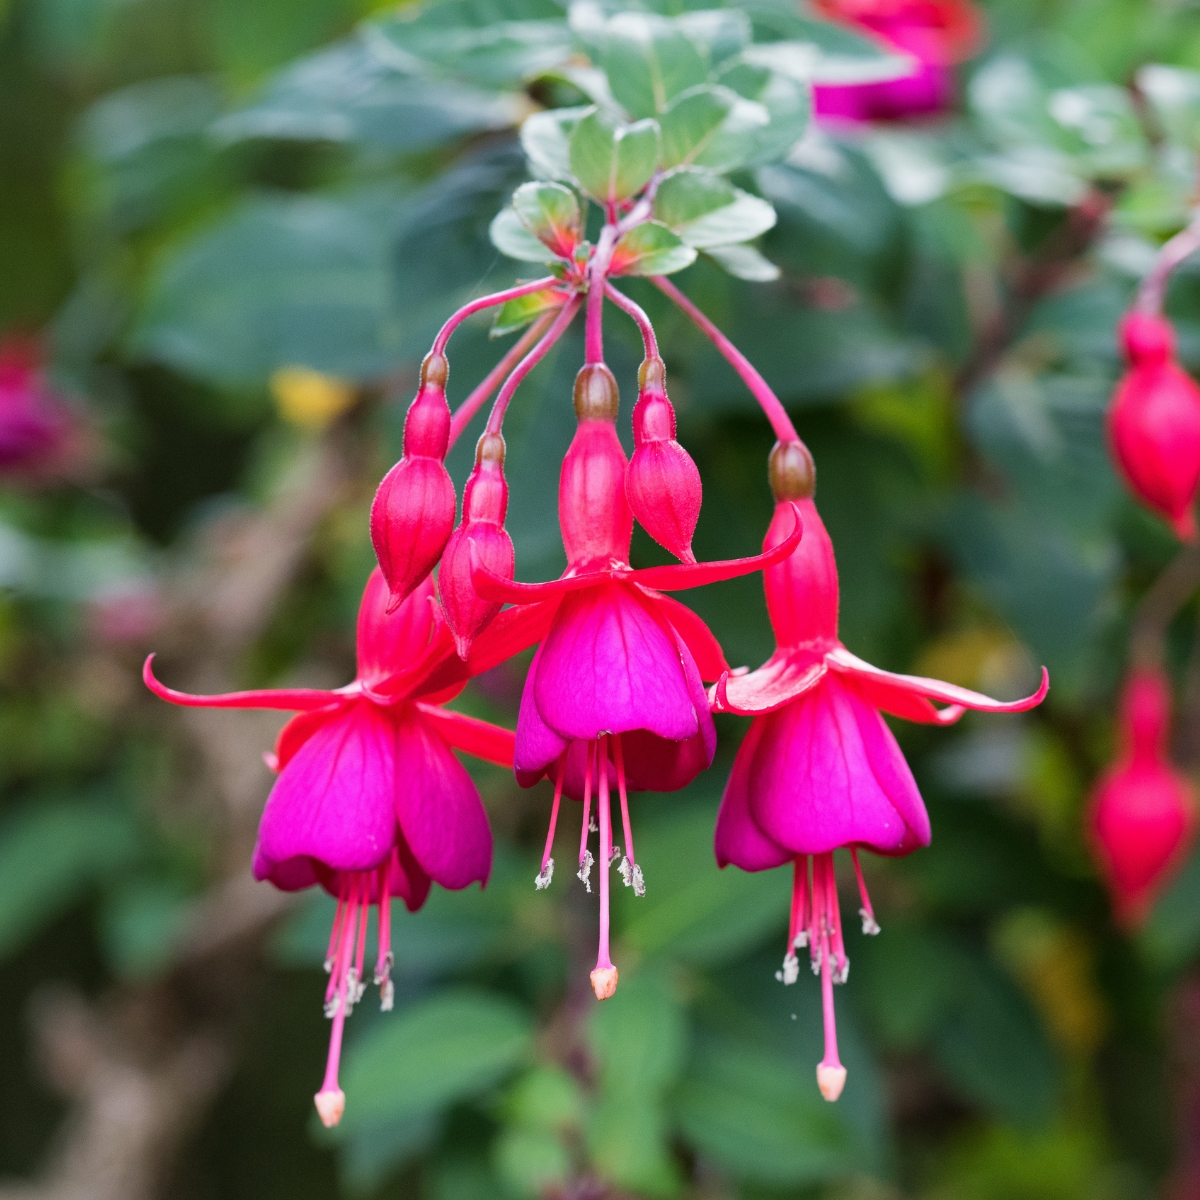 Lure Sporvogn Taknemmelig How to Grow and Care for Fuchsia Plants - growhappierplants.com